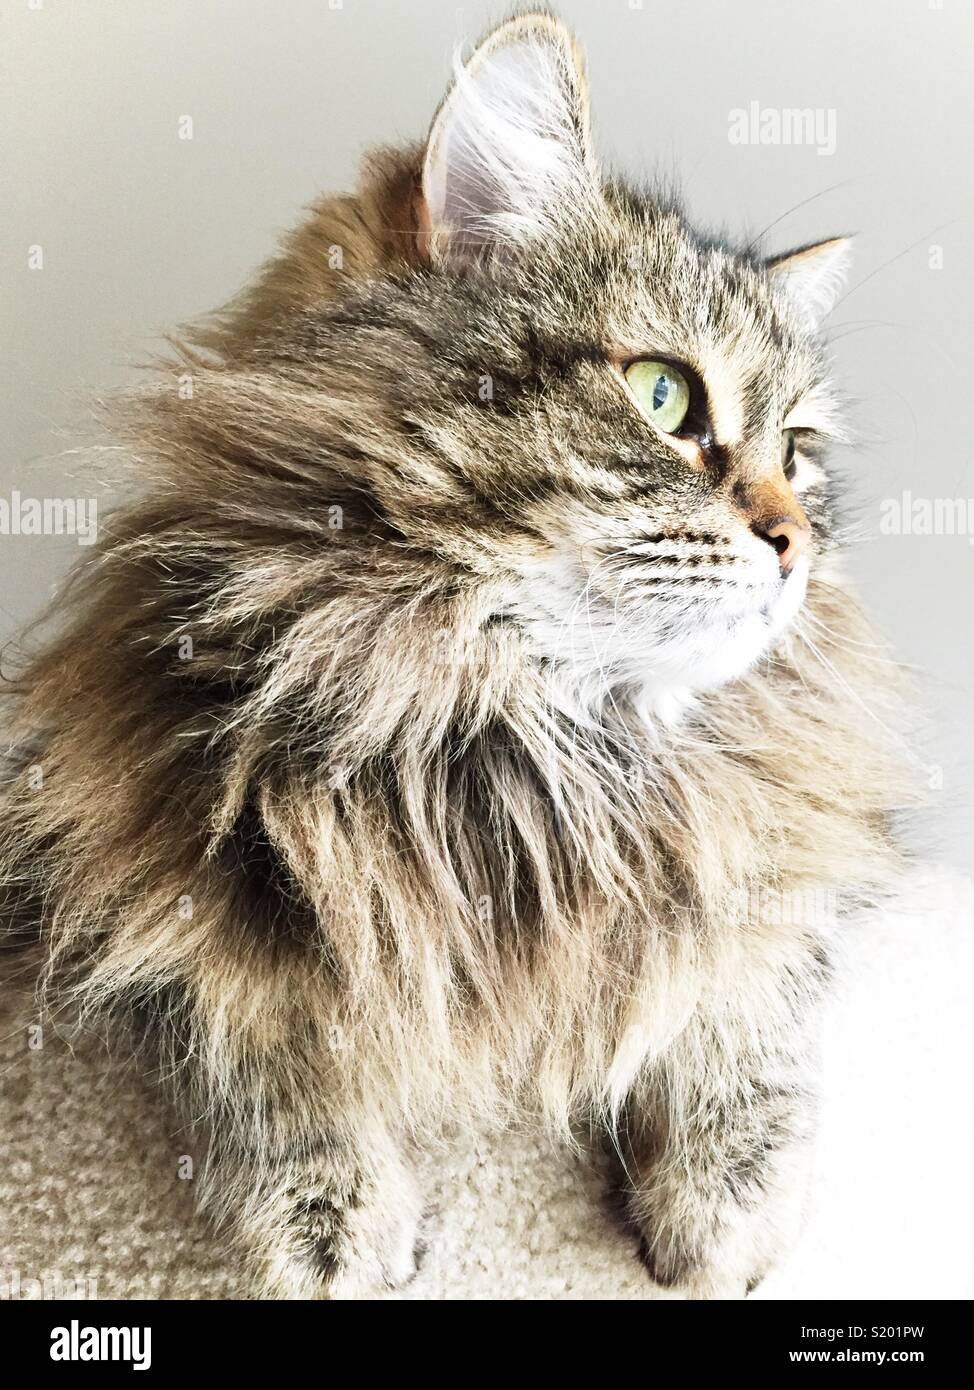 A Siberian Breed Of House Cat Stands Tall And Proud Stock Photo Alamy